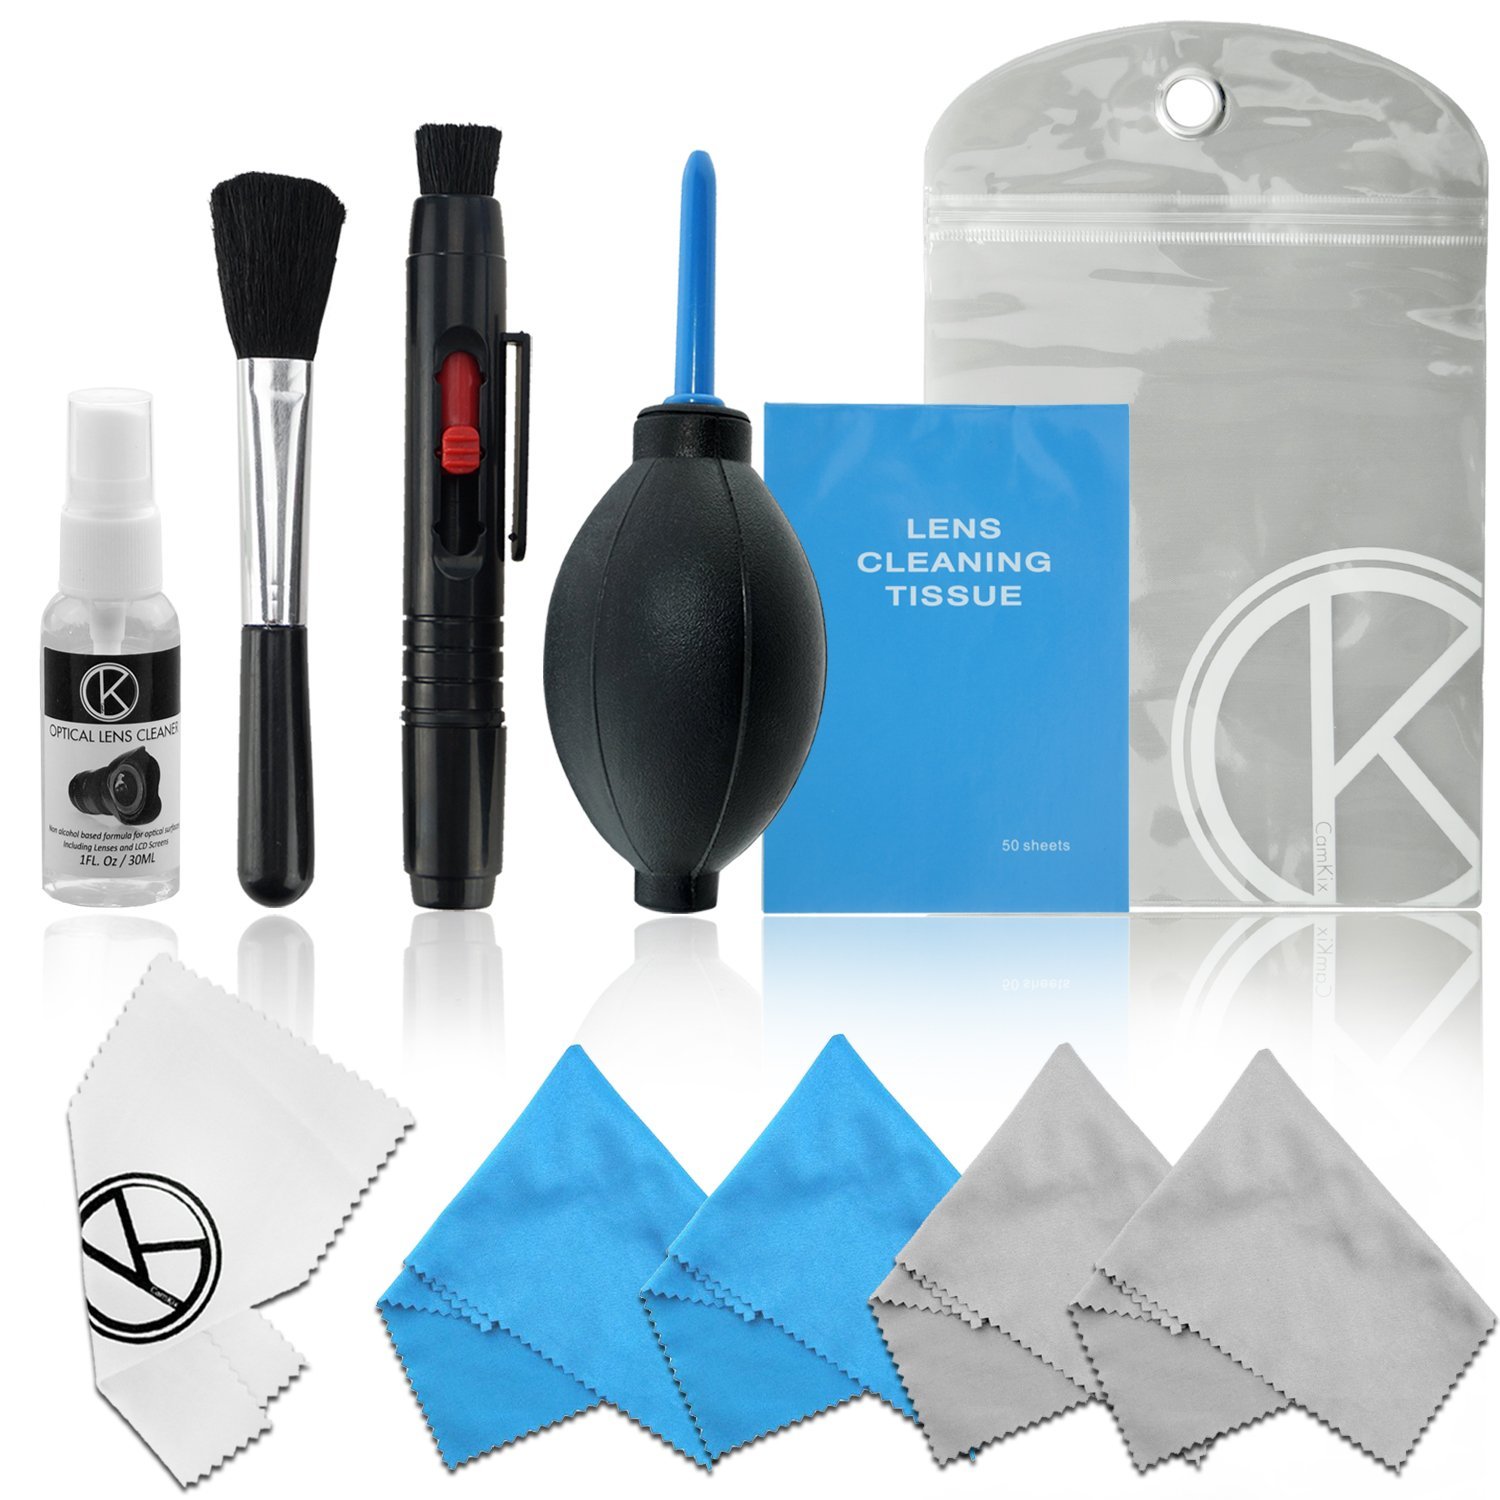 The CamKix Professional Camera Cleaning Kit